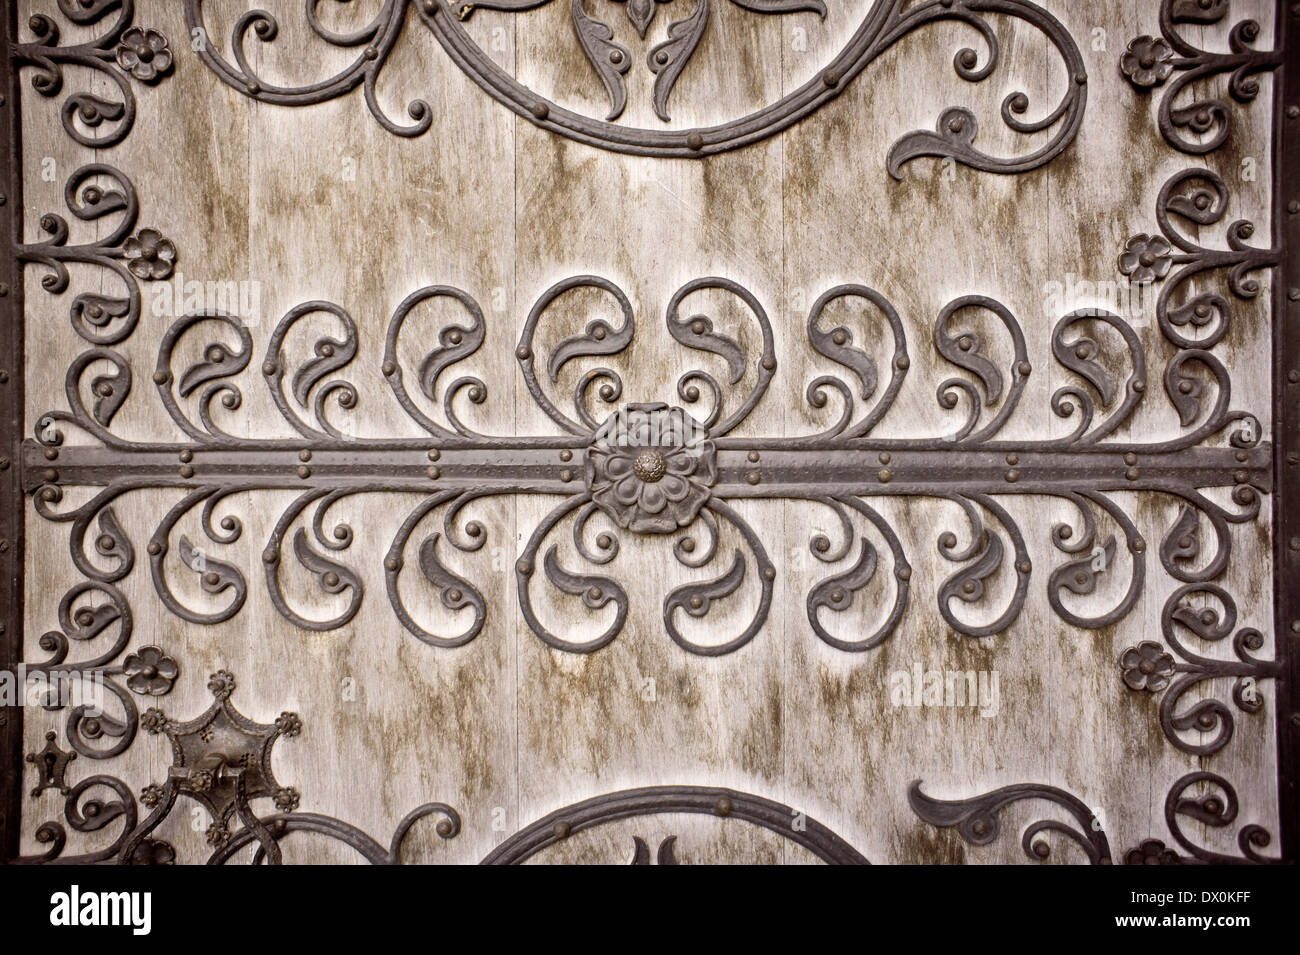 Toned image of a gothic pattern on a wooden doorway as a background. Stock Photo